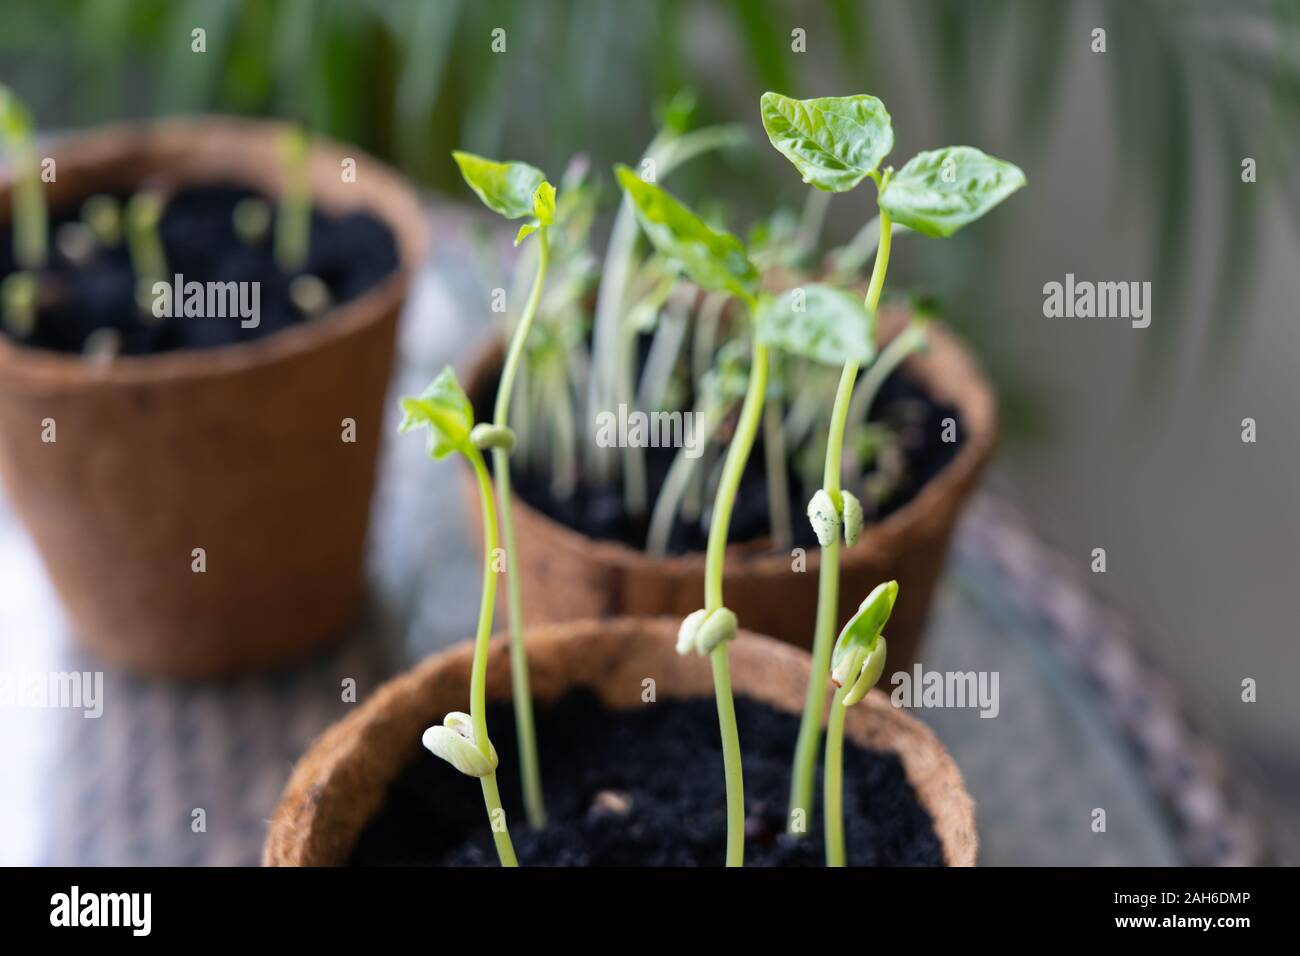 Young bean plants grown in biodegardable plant pots, germinated from their seeds now showing three days of healthy growth. Stock Photo